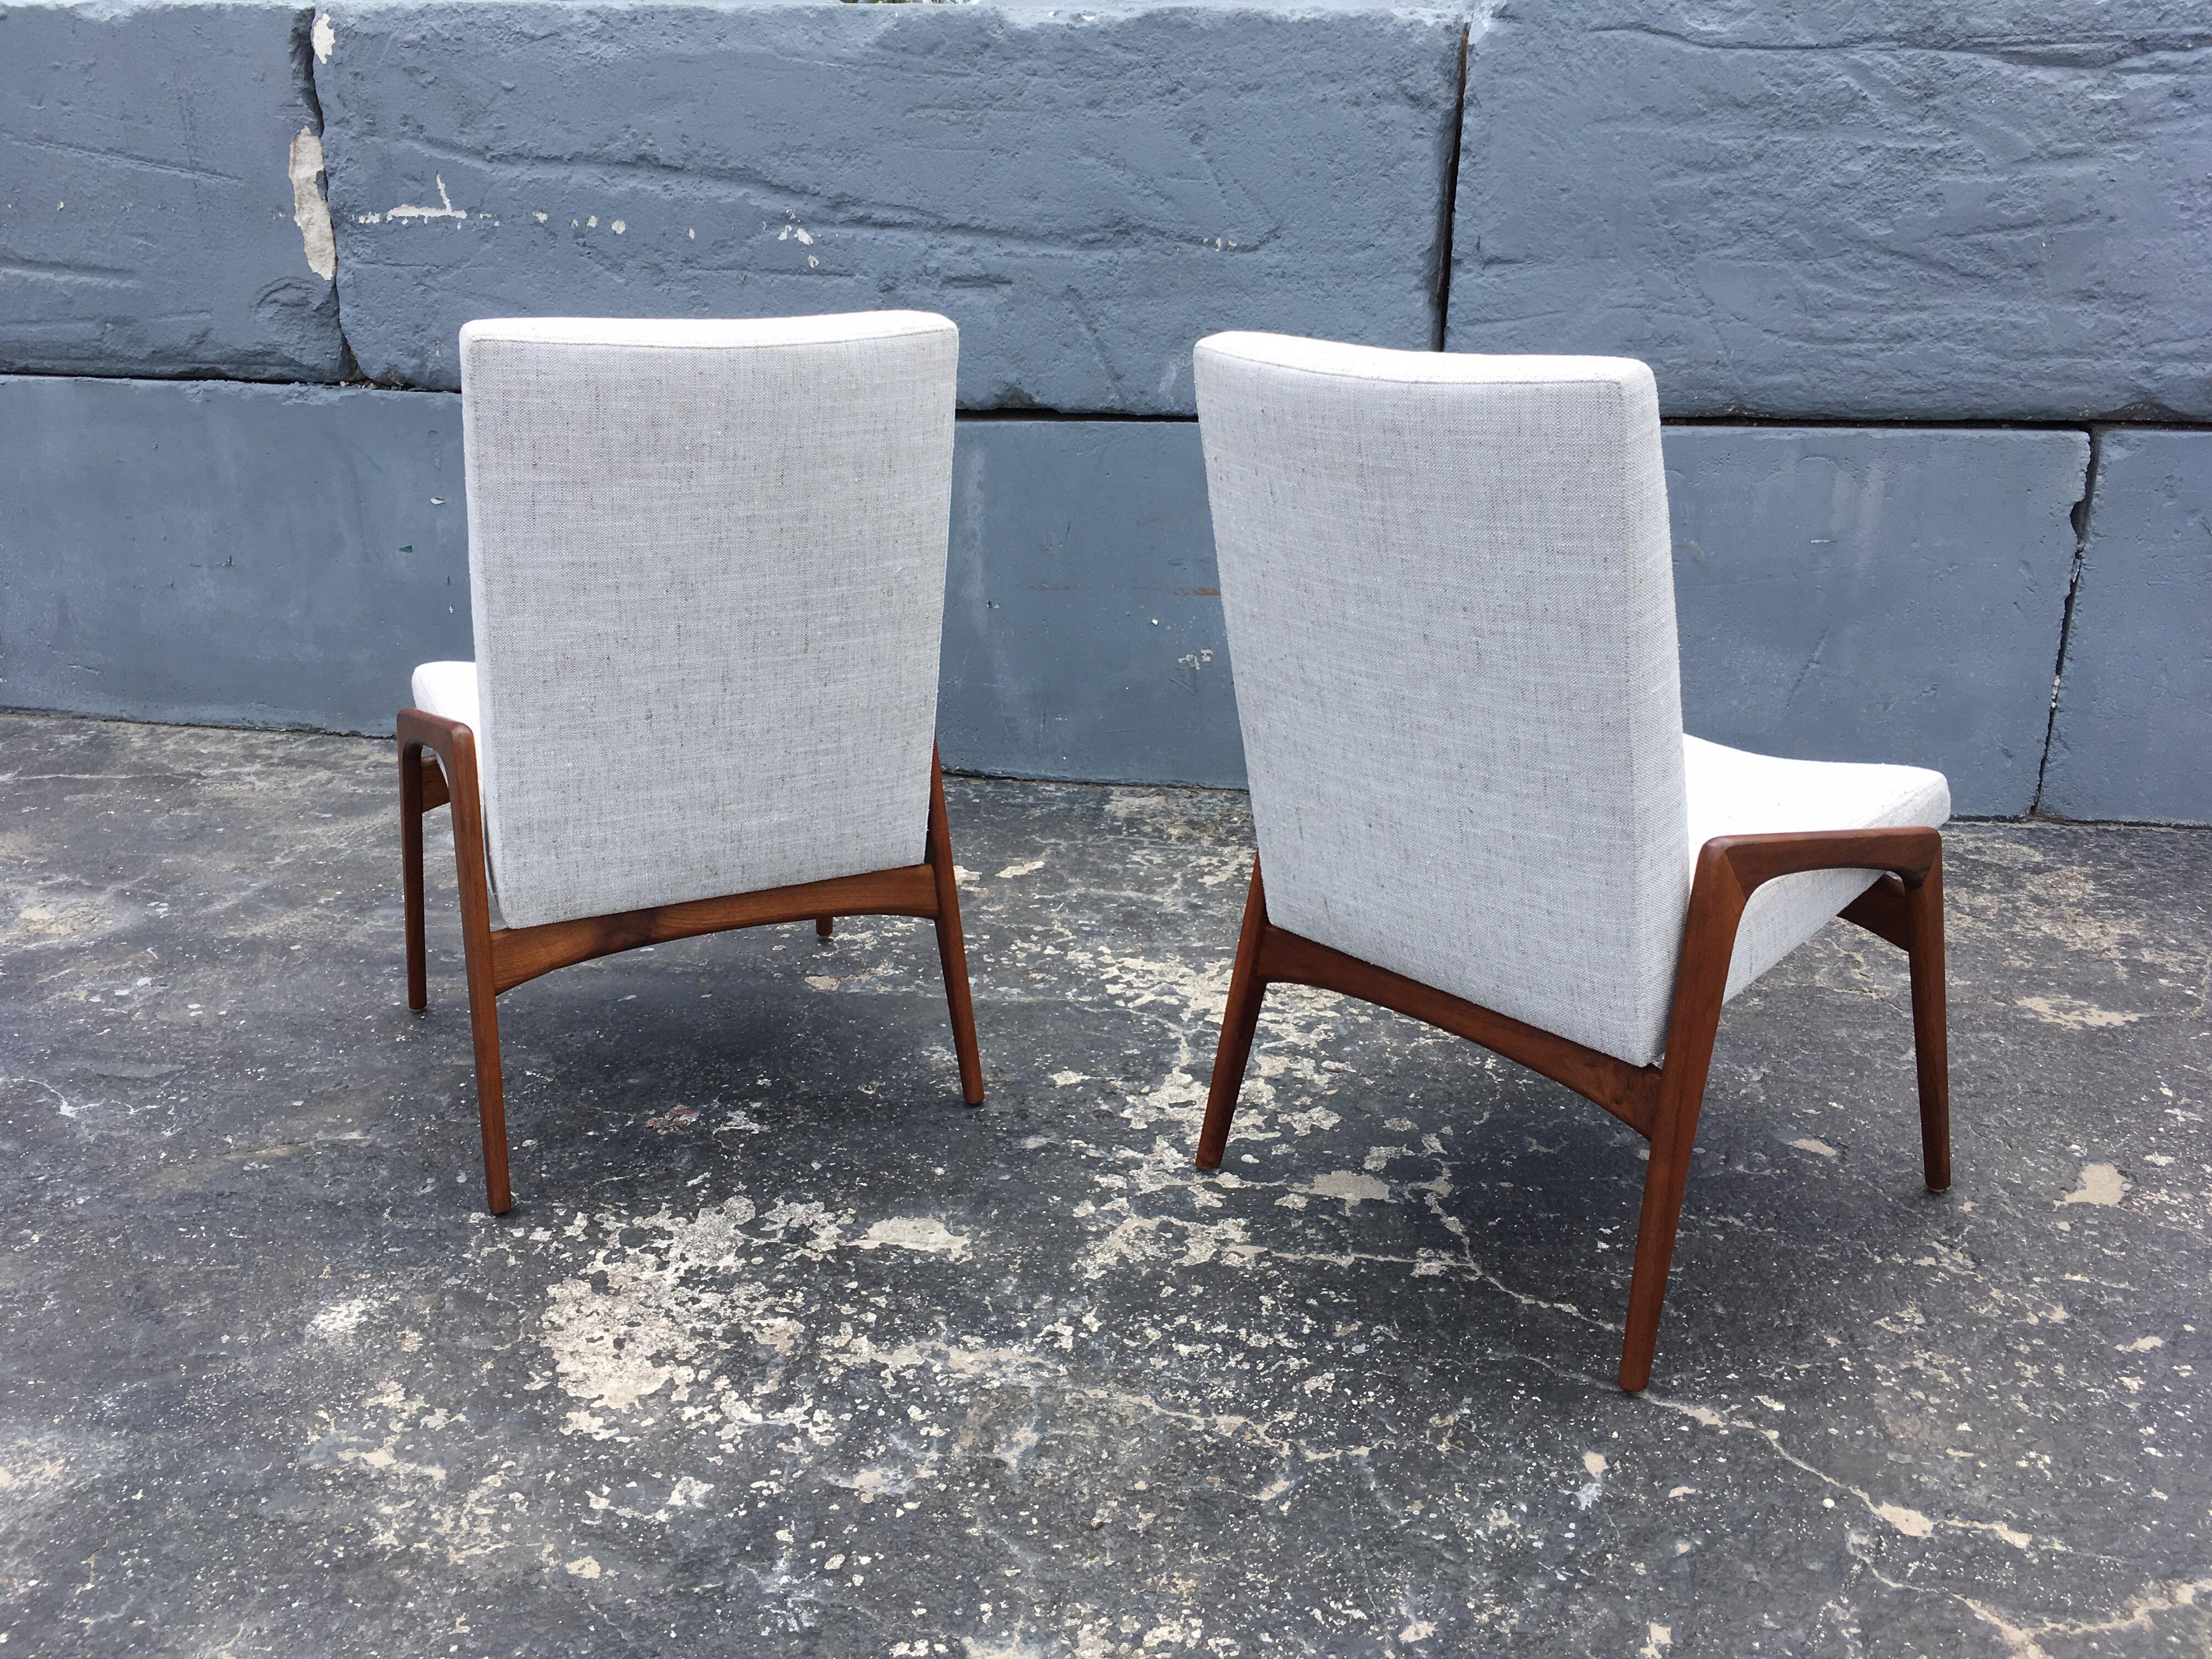 Fabric Pair of Danish Modern Chairs, Walnut, 1950s, Excellent Condition For Sale